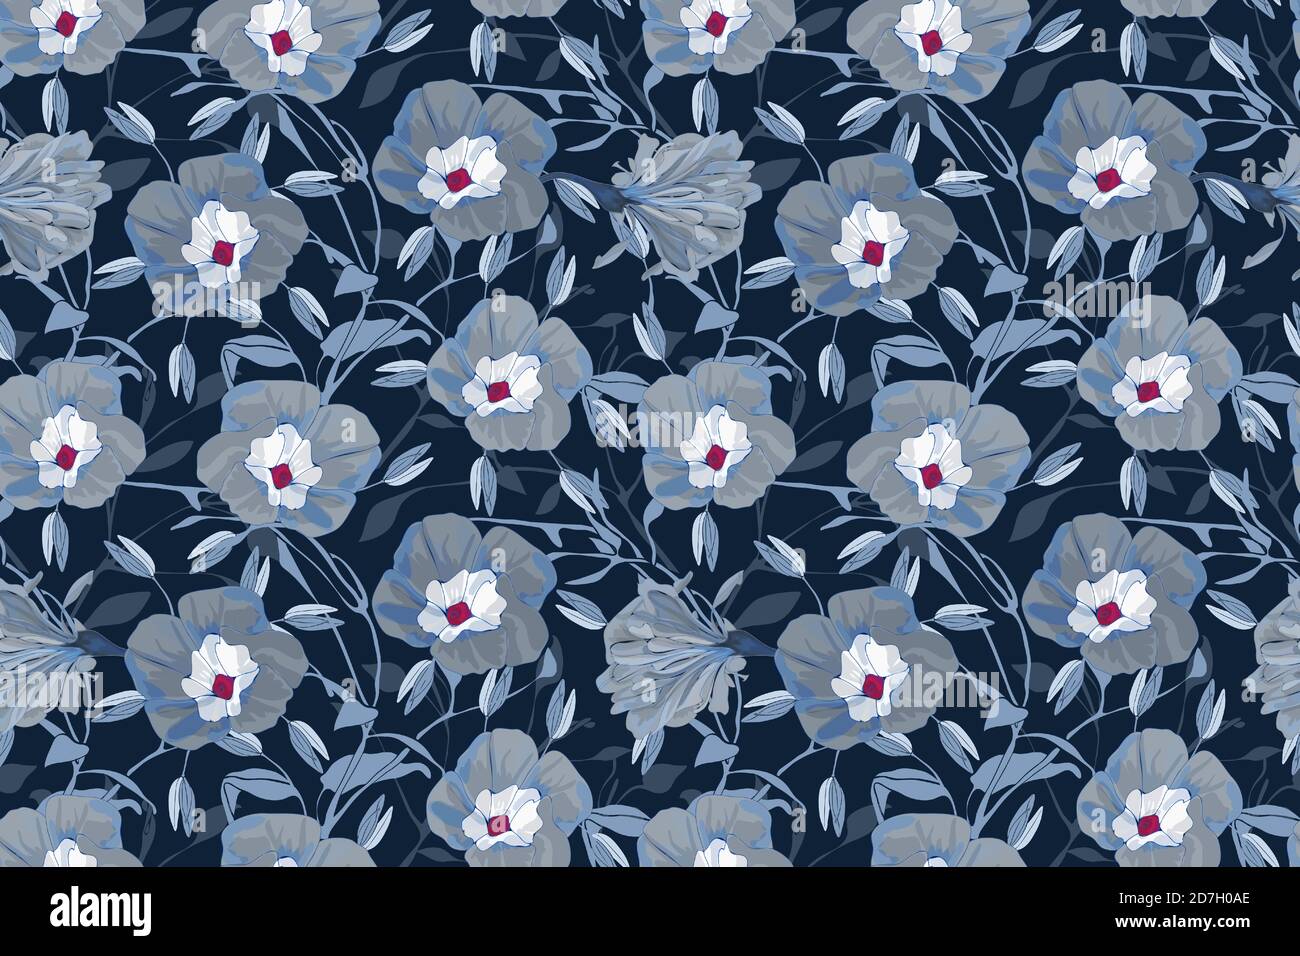 Floral vector seamless pattern. Grey, blue morning glory flowers. Stock Vector